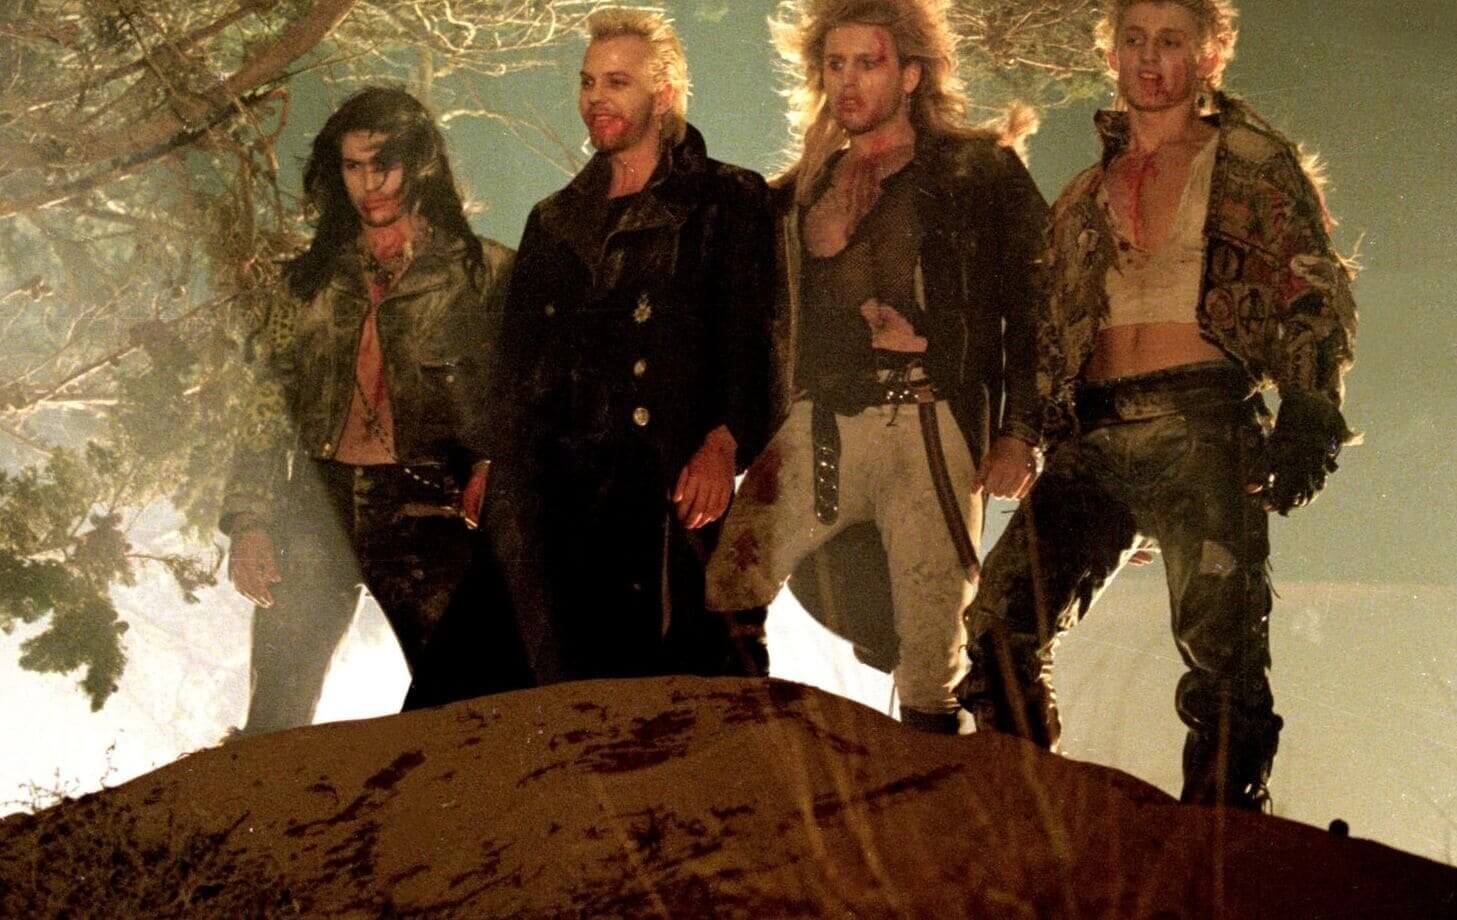 The Lost Boys 4K 1987 big poster